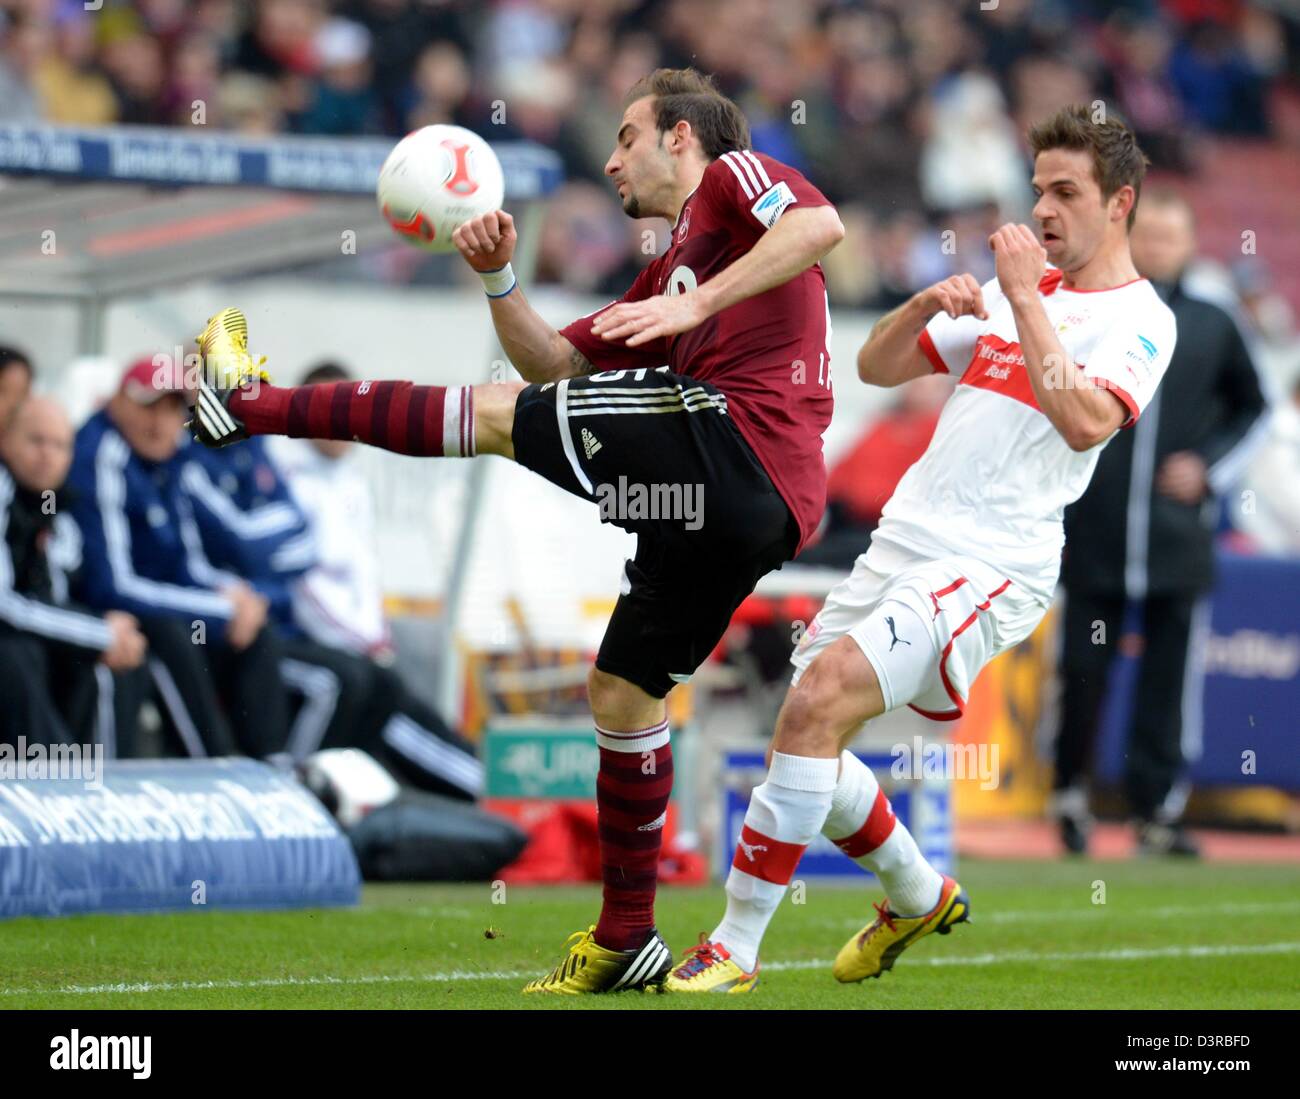 Stuttgart, Germany. 23rd February 2013. Stuttgart's Martin Harnik (R) vies for the ball with Nuremberg's Javier Pinoladuring the Bundesliga soccer match between VfB Stuttgart and FC Nuremberg at Mercedes-Benz Arena in Stuttgart, Germany, 23 February 2013. Photo: BERND WEISSBROD/dpa/Alamy Live News  (ATTENTION: EMBARGO CONDITIONS! The DFL permits the further  utilisation of up to 15 pictures only (no sequntial pictures or video-similar series of pictures allowed) via the internet and online media during the match (including halftime), taken from inside the stadium and/or prior to the start of t Stock Photo